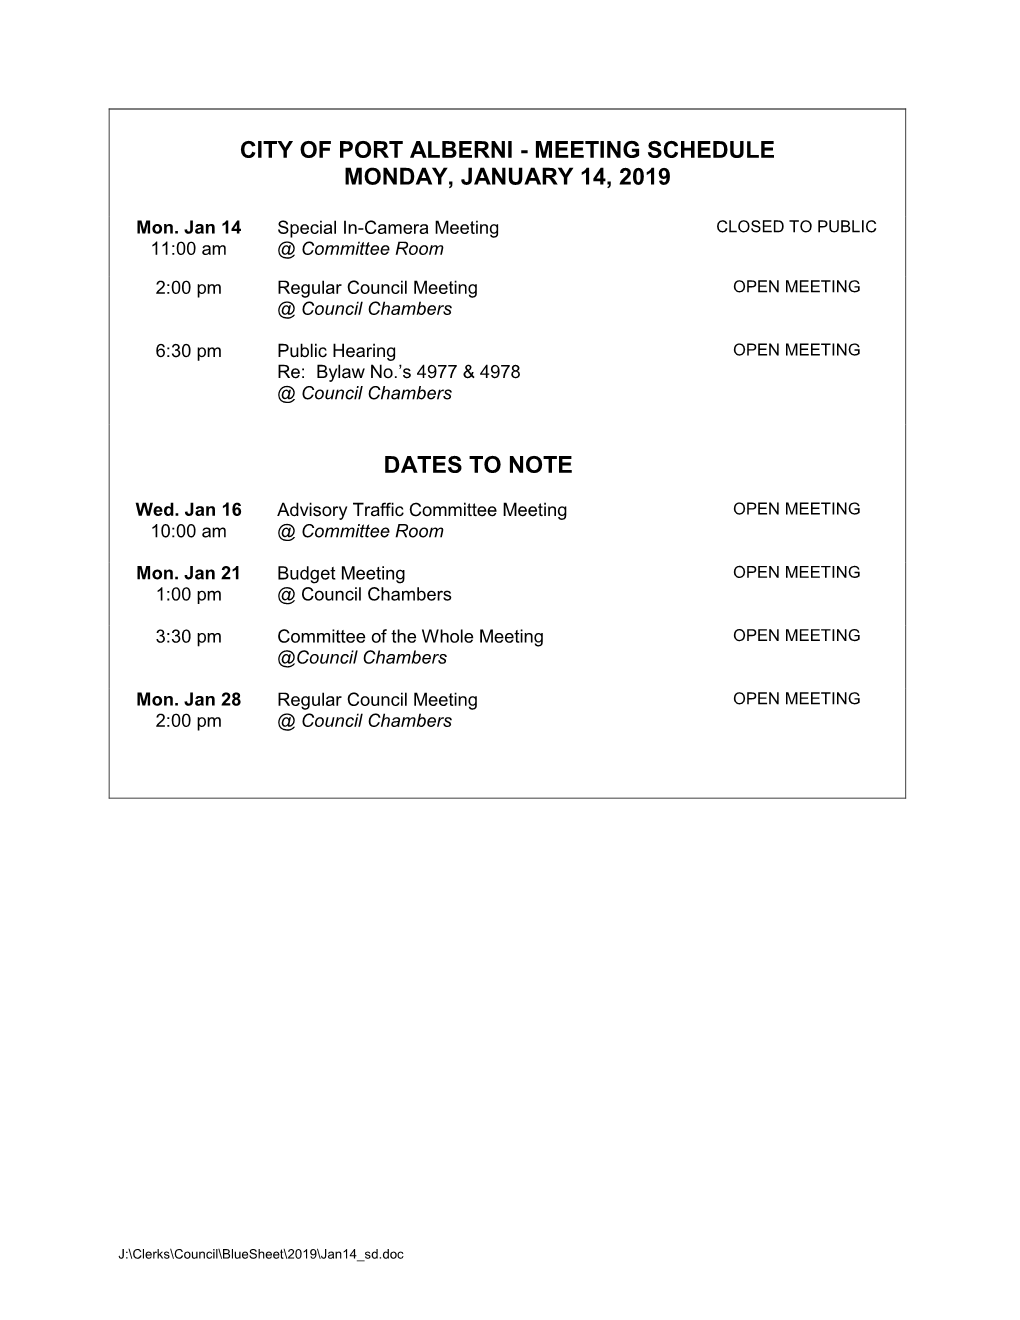 Meeting Schedule Monday, January 14, 2019